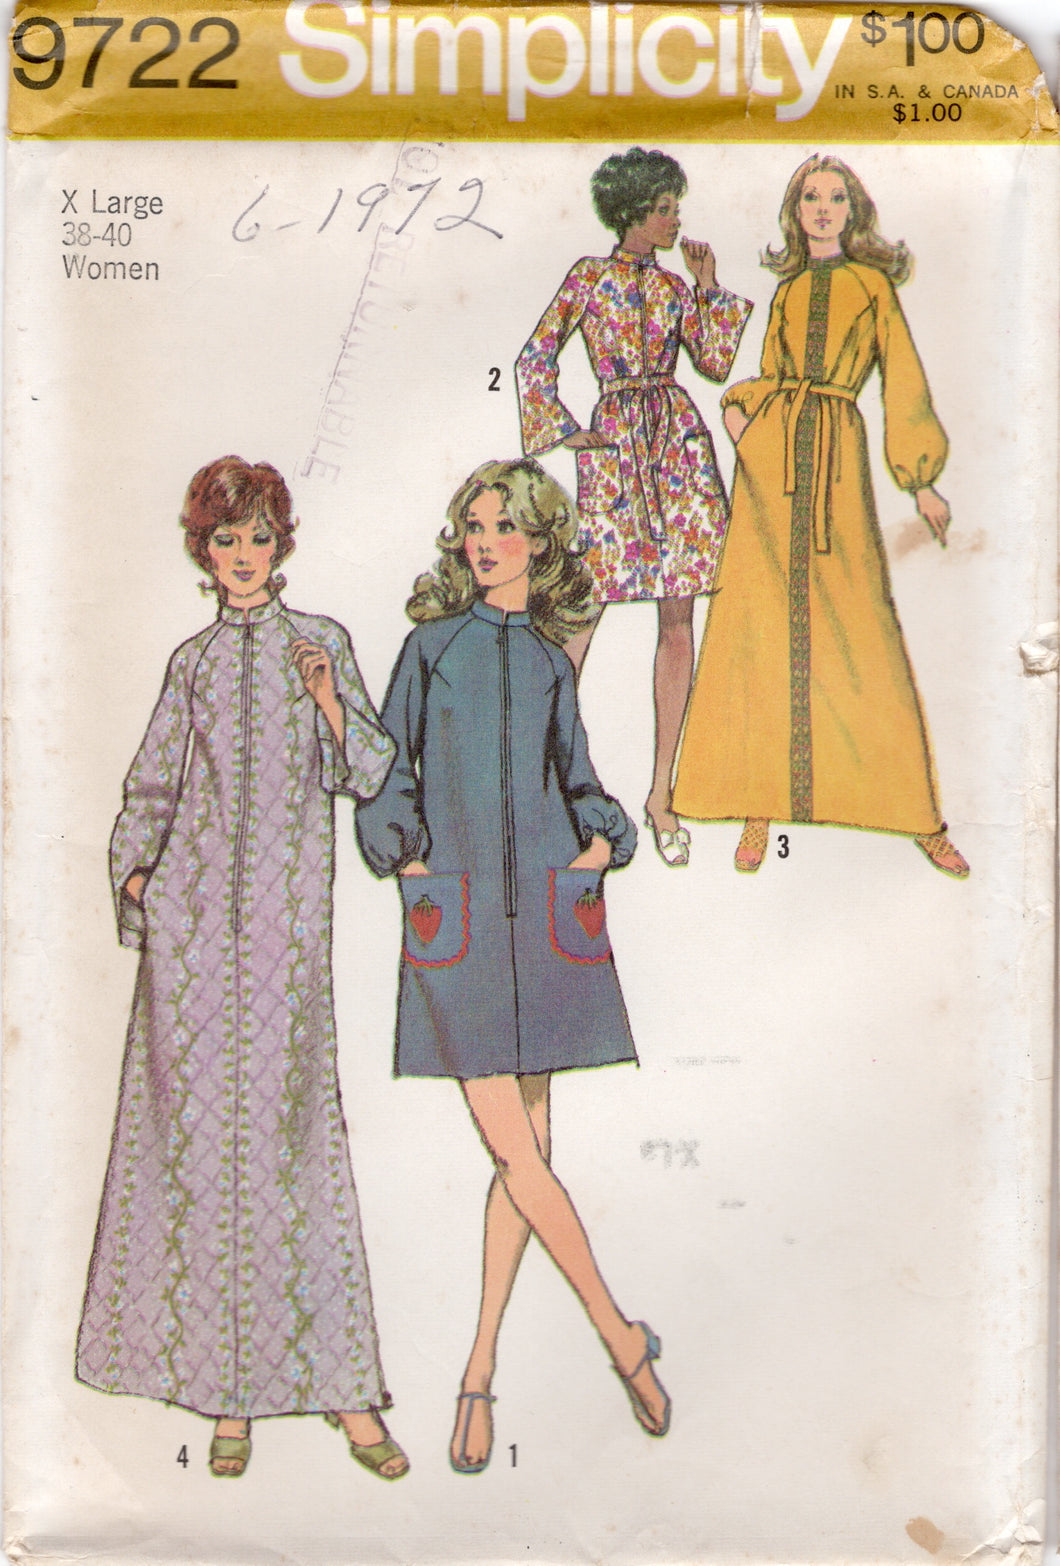 1970’s Simplicity Robe in Two Lengths and Raglan Sleeves - Bust 38-40” - No. 9722